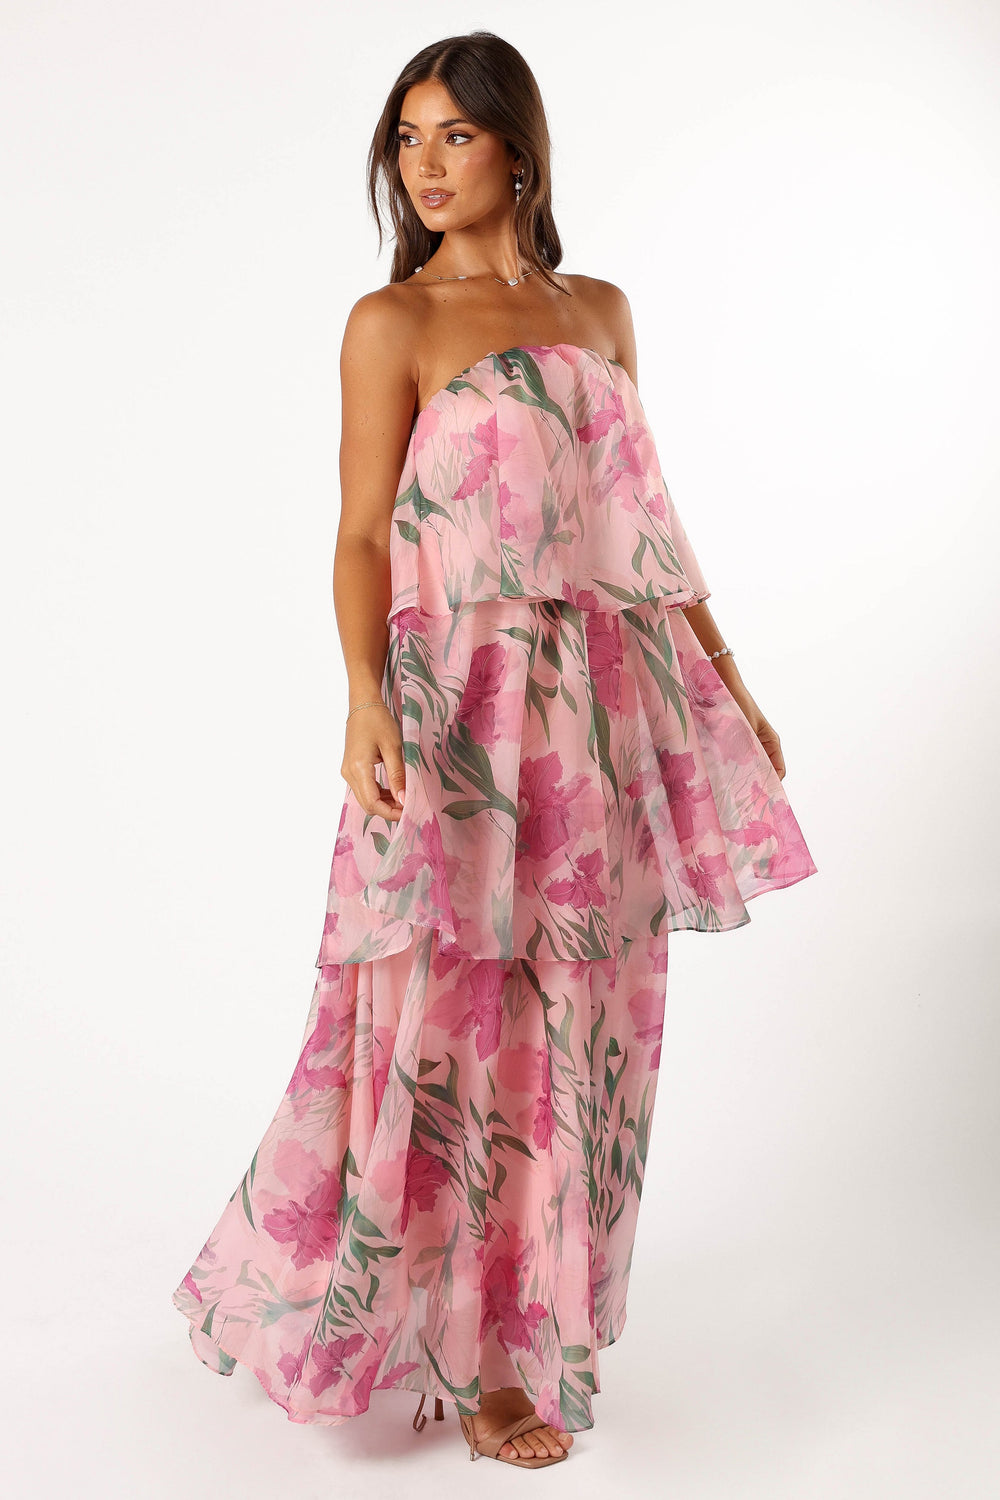 Petal and Pup USA DRESSES Bloom Strapless Maxi Dress - Pink Floral